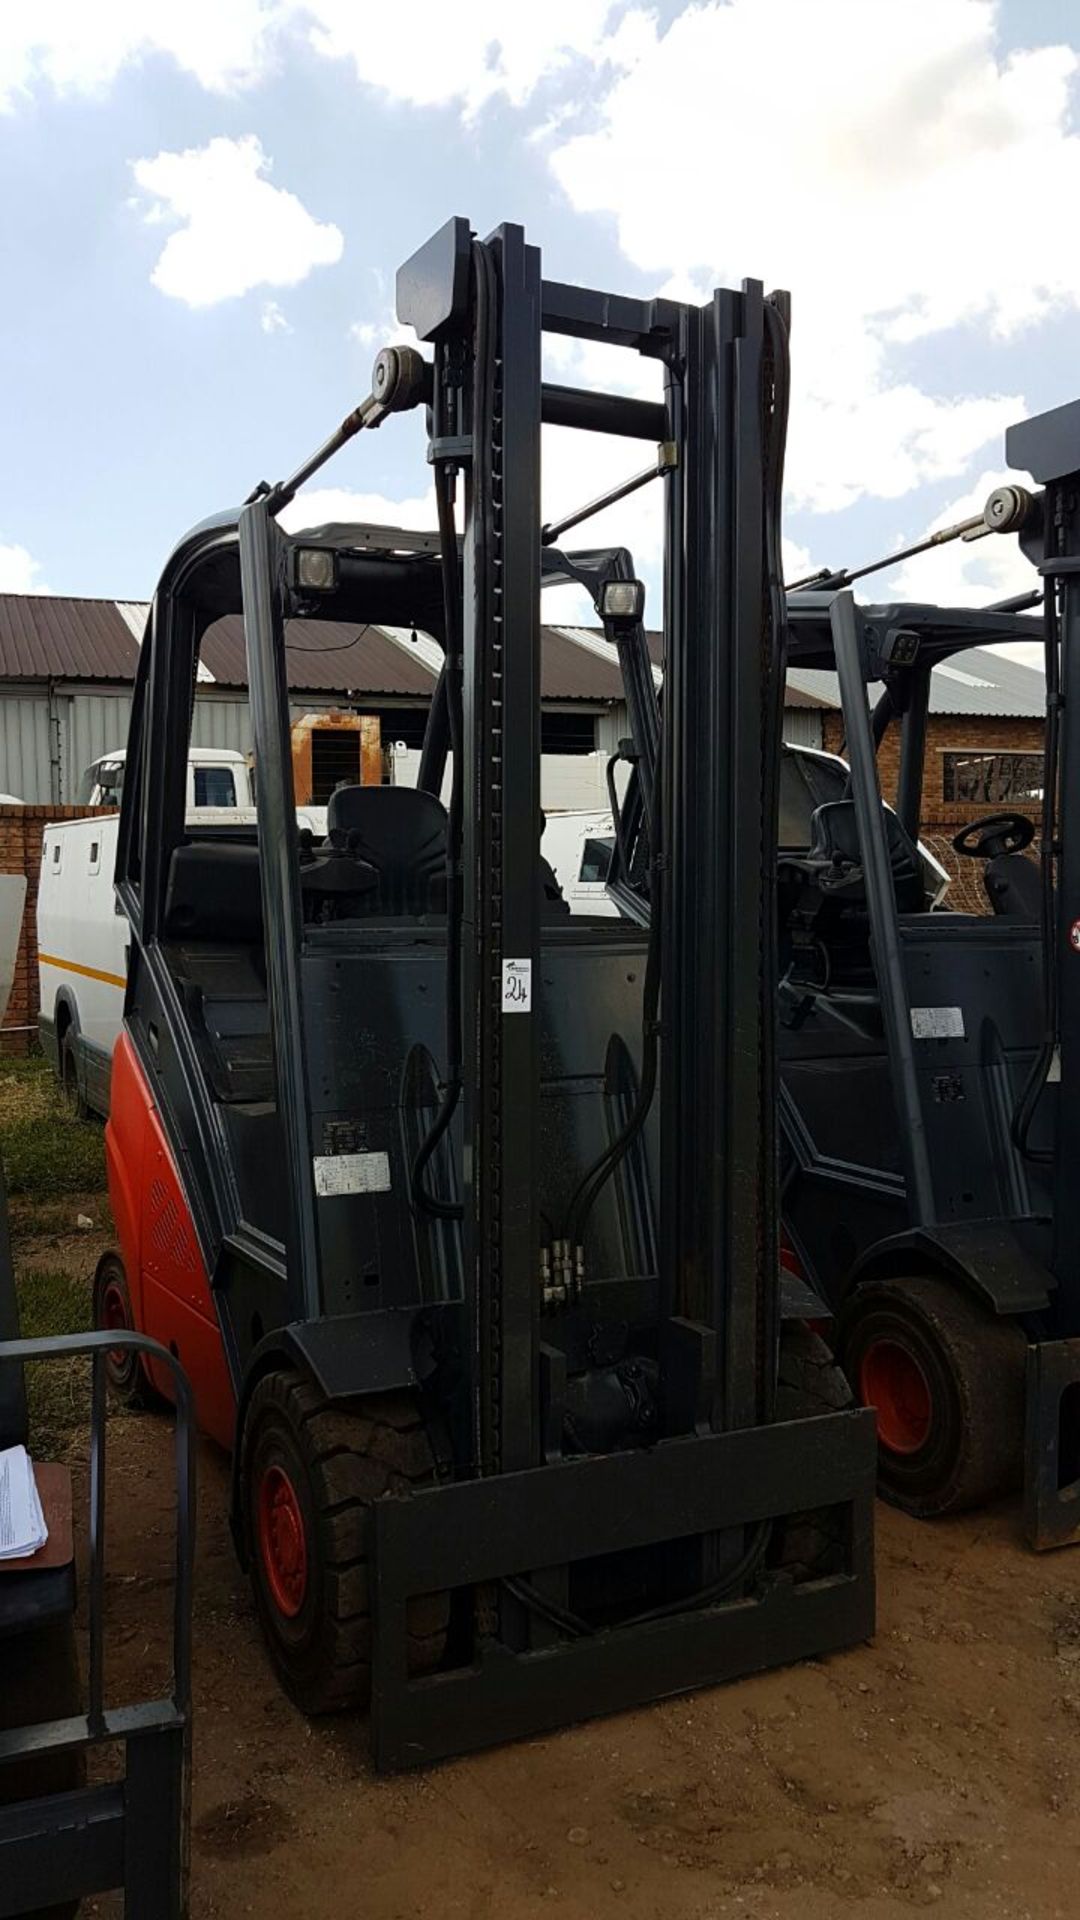 2008 LINDE H30T 3 TON GAS FORKLIFT (10,711 HOURS - HOURS NOT GUARANTEED BY AUCTIONEER) H2X393W03535 - Image 3 of 3